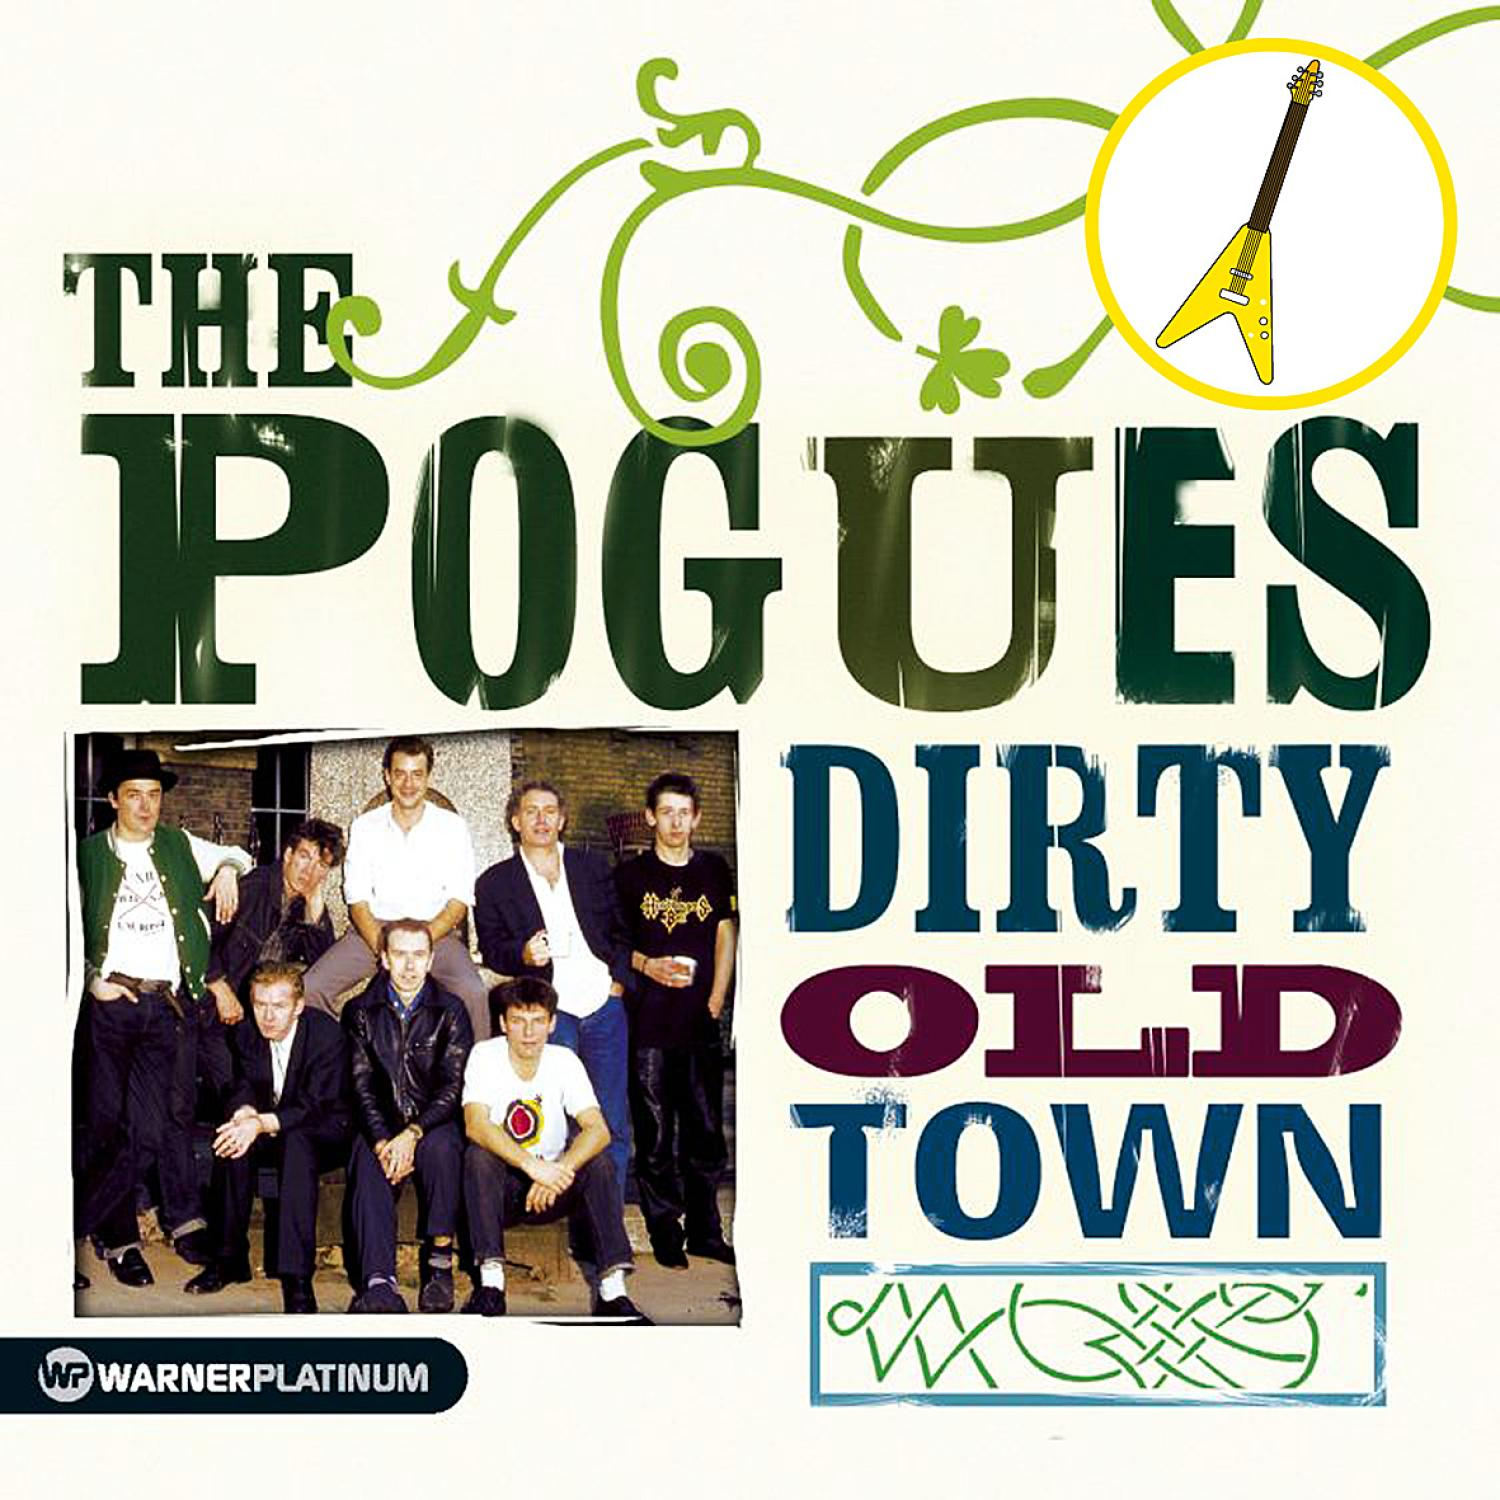 Town The Old (CD) Pogues - Collection - Dirty - Platinum